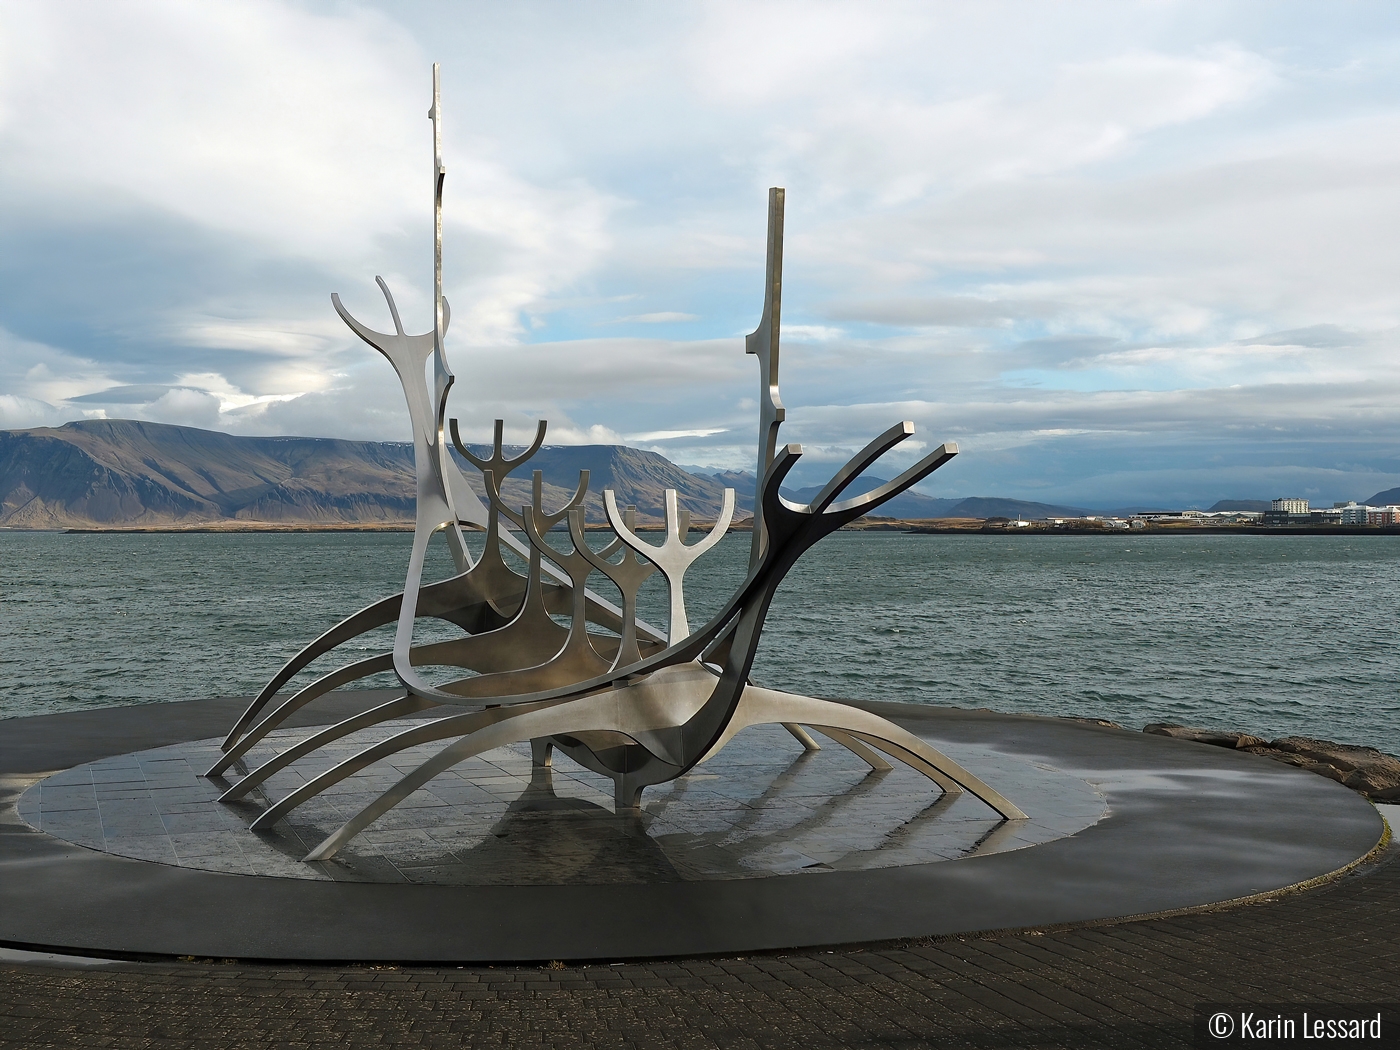 The Sun Voyager by Karin Lessard